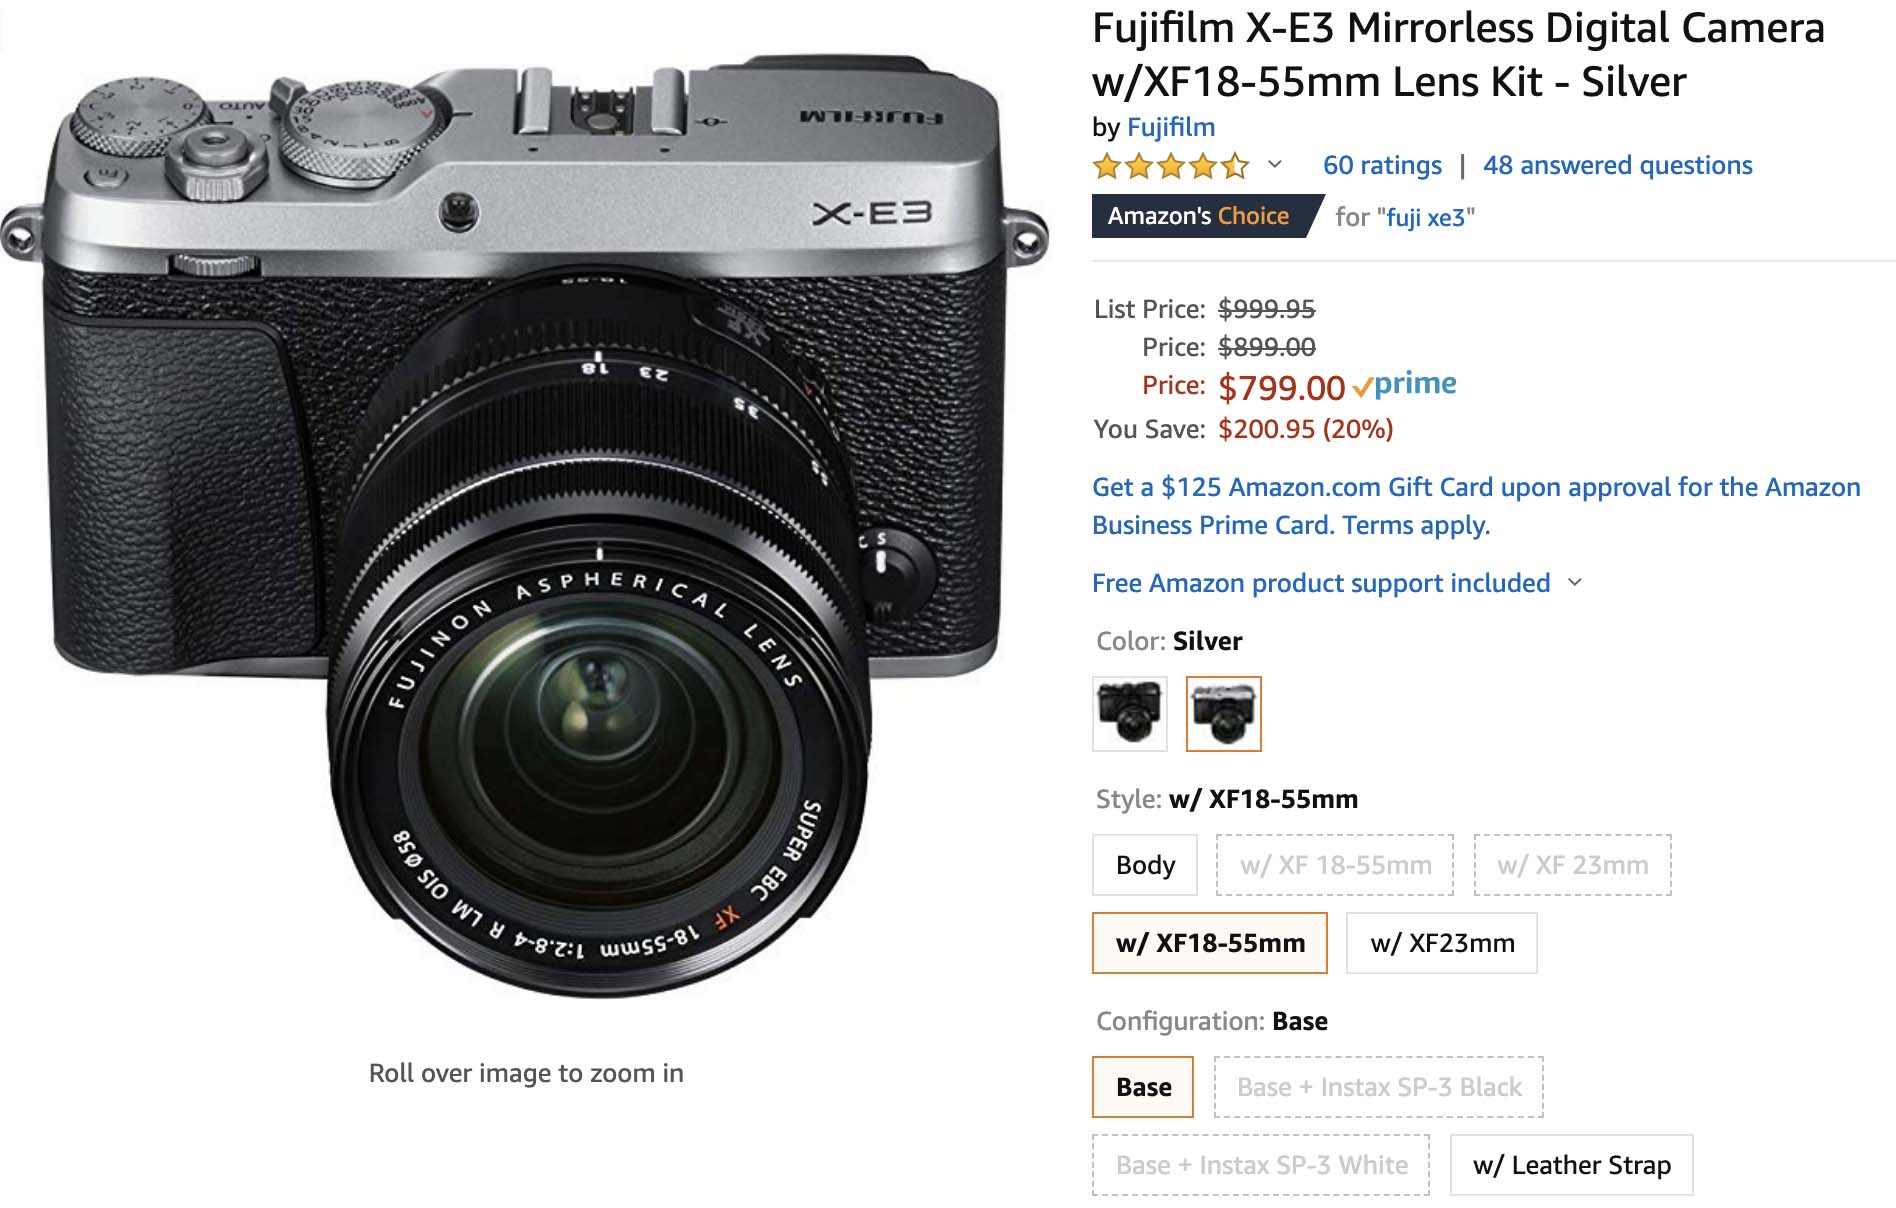 Fujifilm X-E3 Now $799 With Kit Lens and $599 For The Body - Fuji